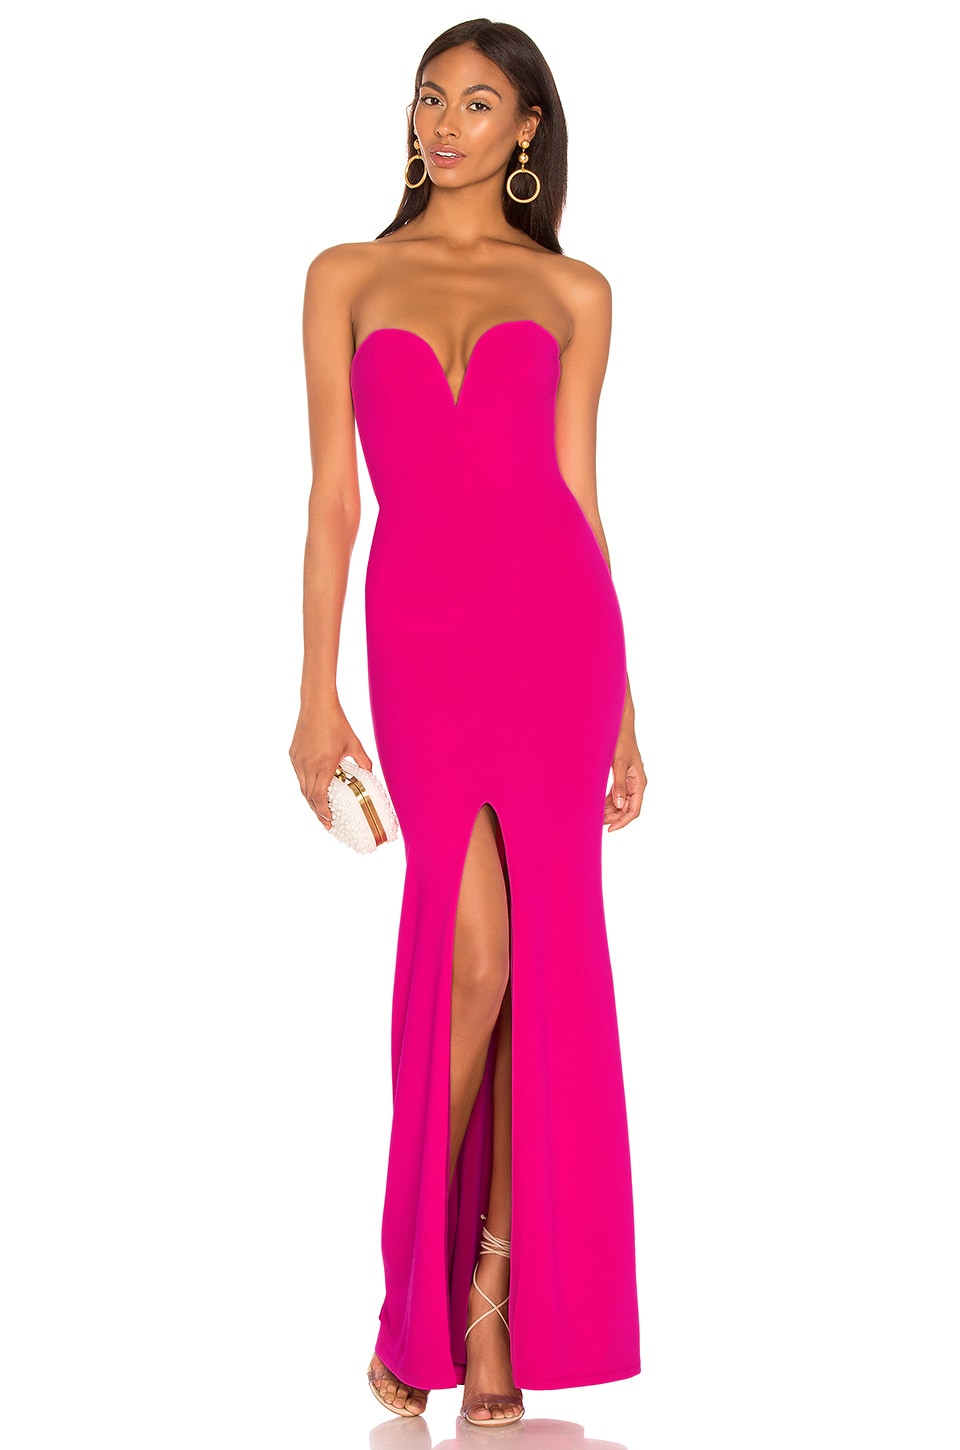 revolve pink gown